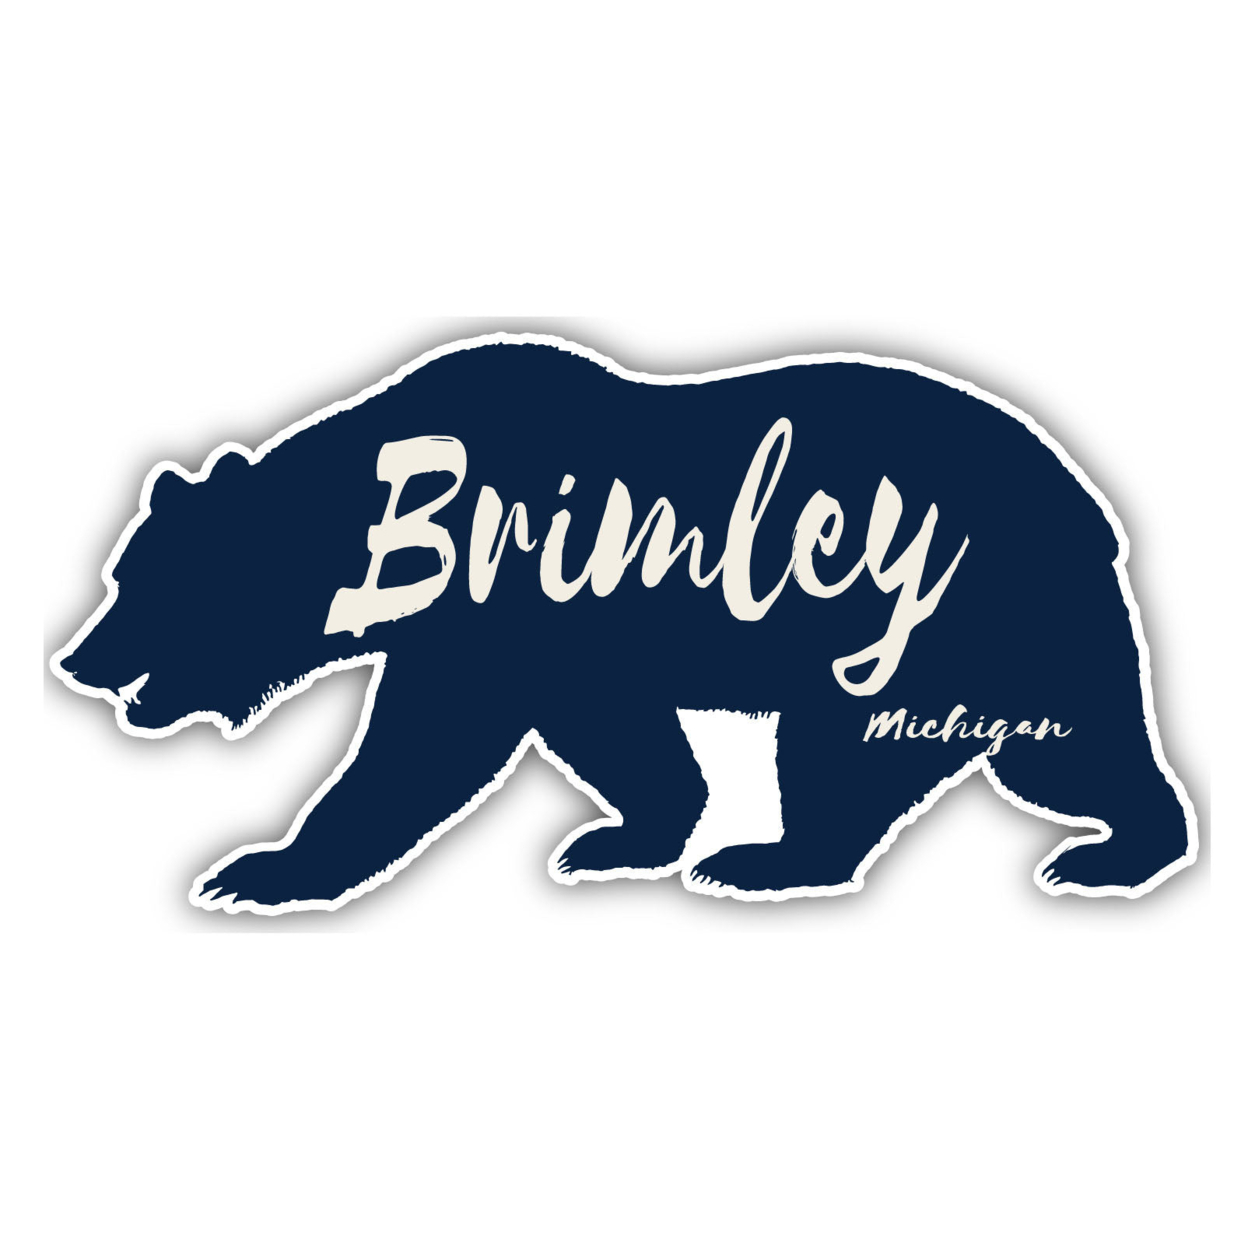 Brimley Michigan Souvenir Decorative Stickers (Choose Theme And Size) - 4-Pack, 10-Inch, Great Outdoors